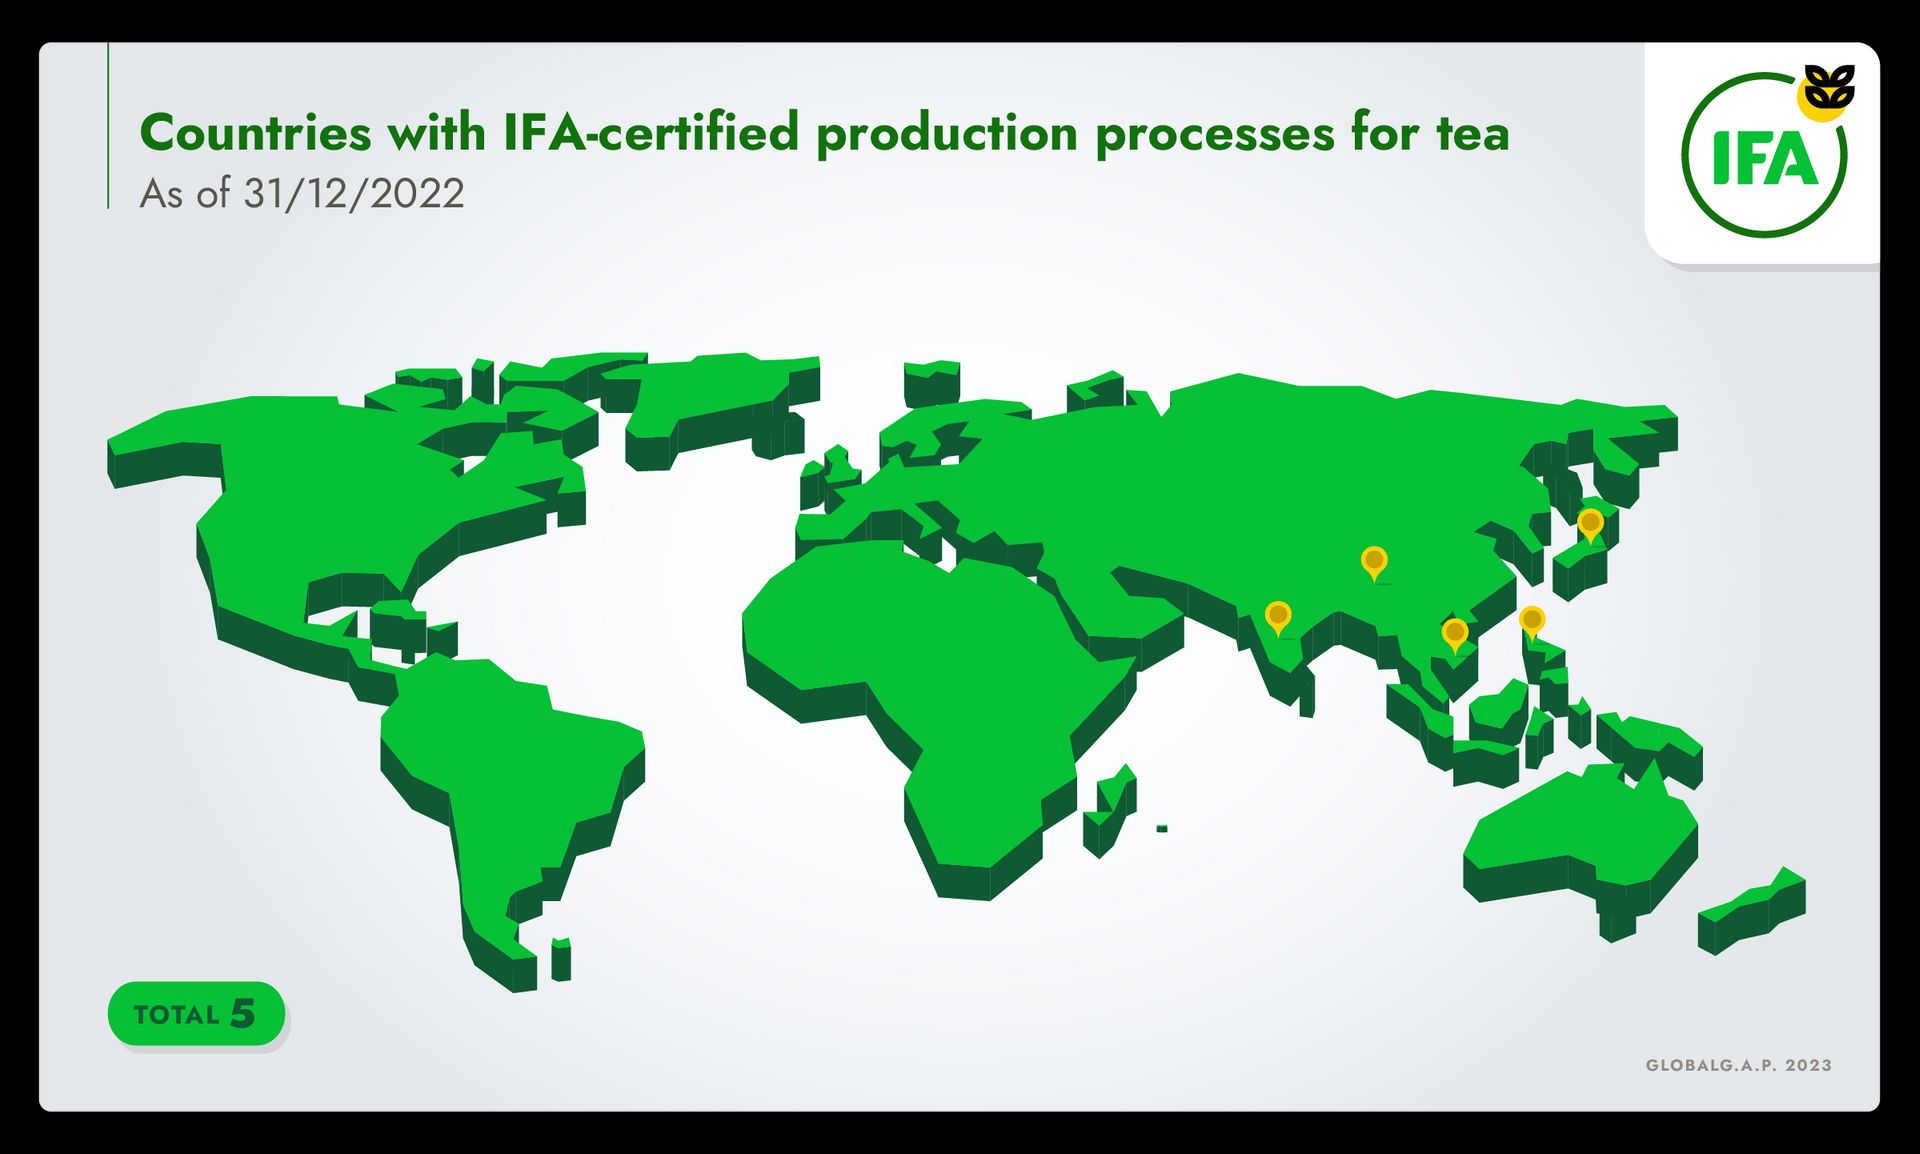 World map identifying countries with Integrated Farm Assurance certified production processes for tea.